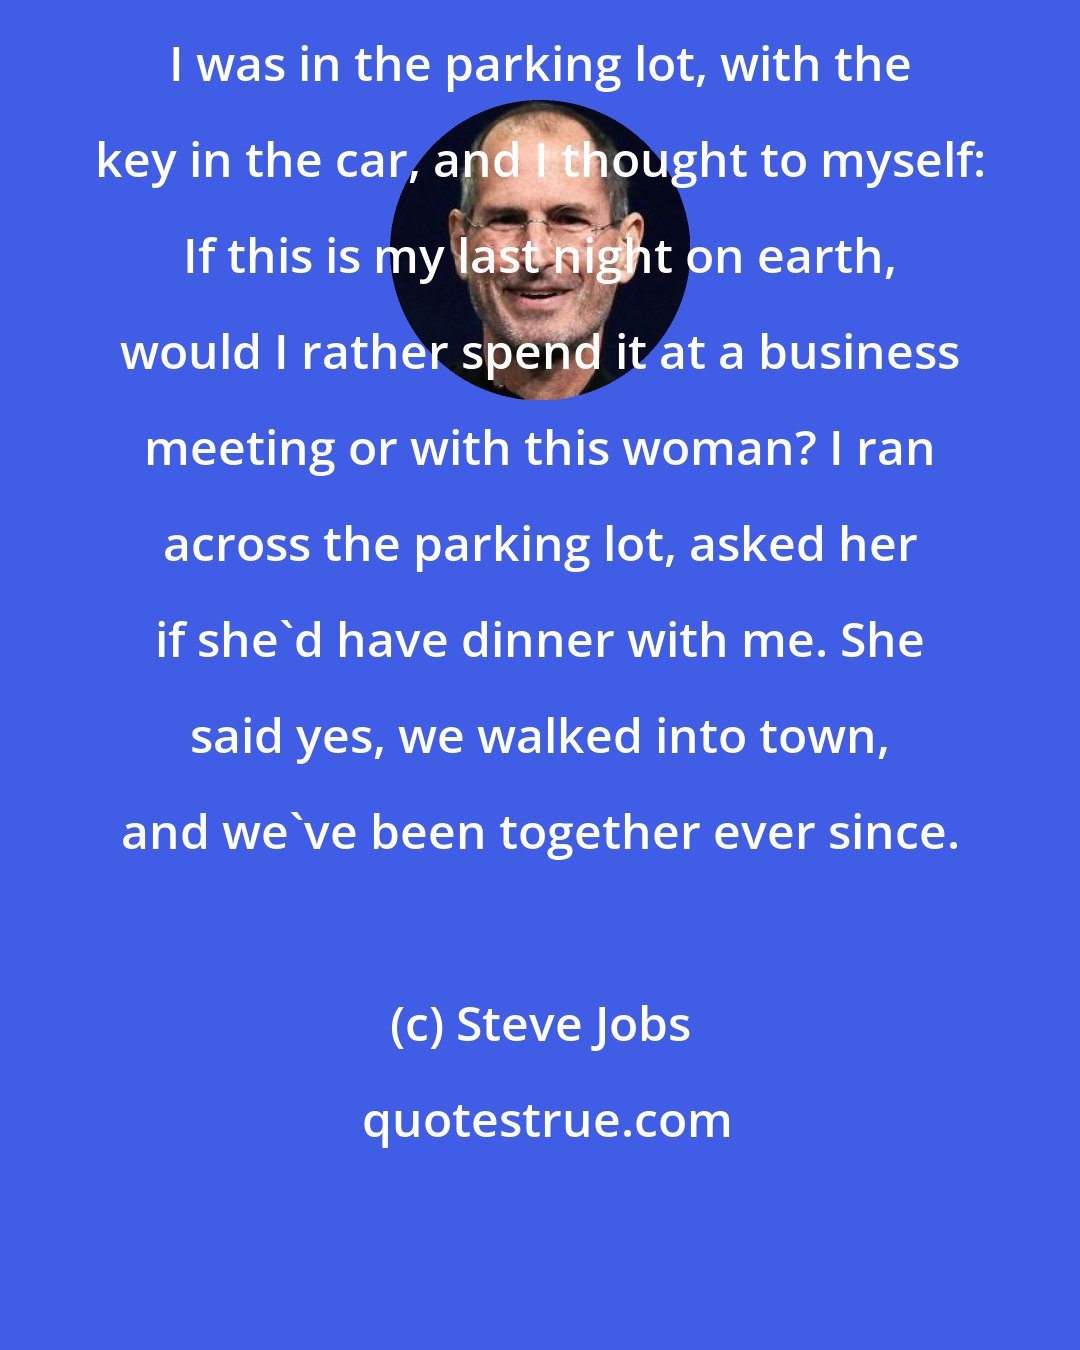 Steve Jobs: I was in the parking lot, with the key in the car, and I thought to myself: If this is my last night on earth, would I rather spend it at a business meeting or with this woman? I ran across the parking lot, asked her if she'd have dinner with me. She said yes, we walked into town, and we've been together ever since.